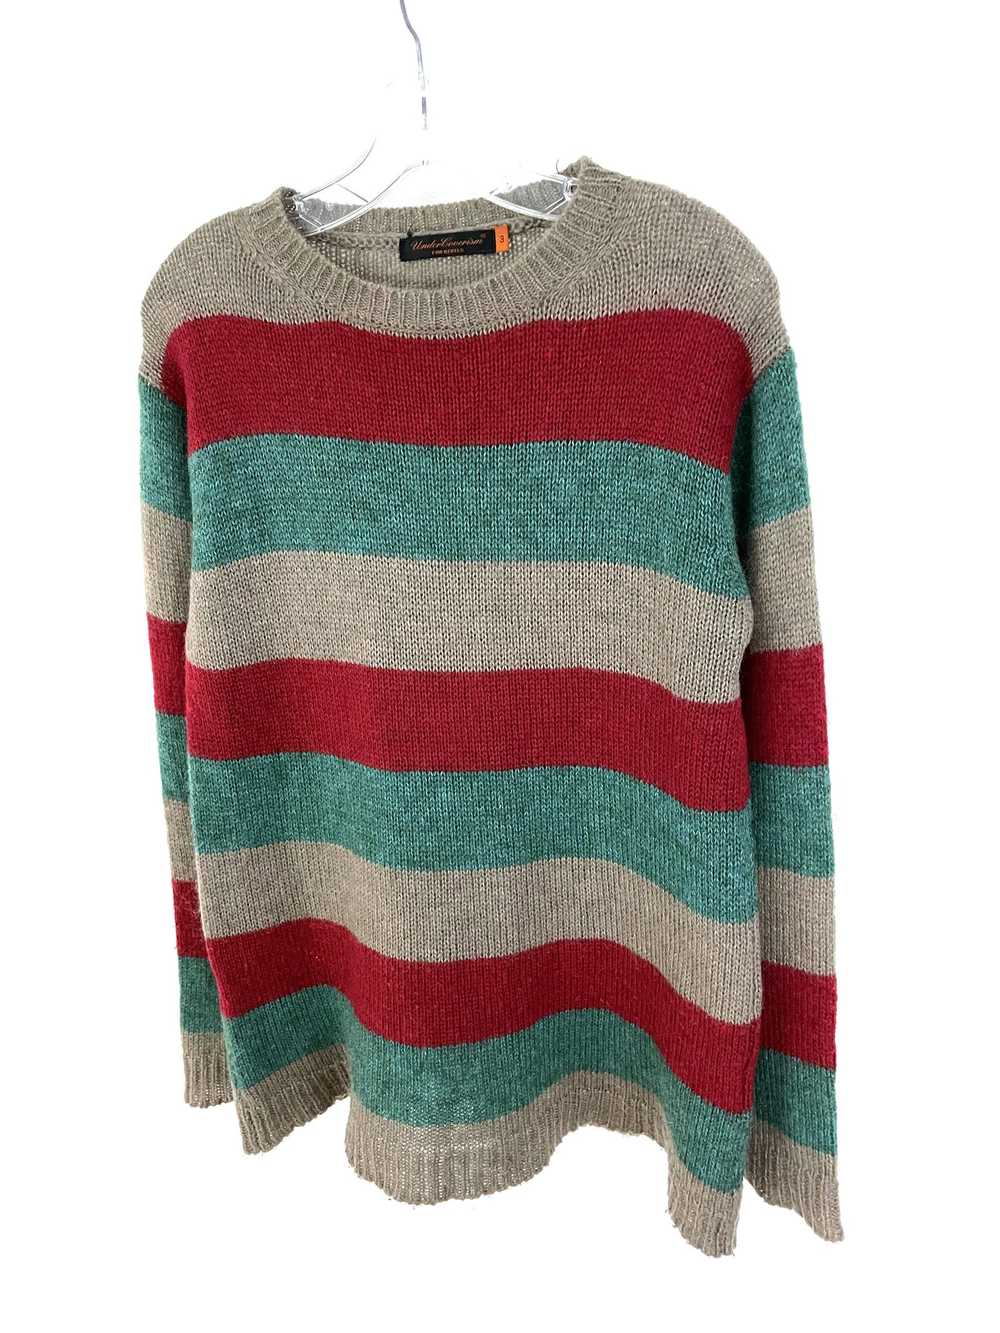 Undercover AW05 Arts & Crafts Mohair Sweater - image 2